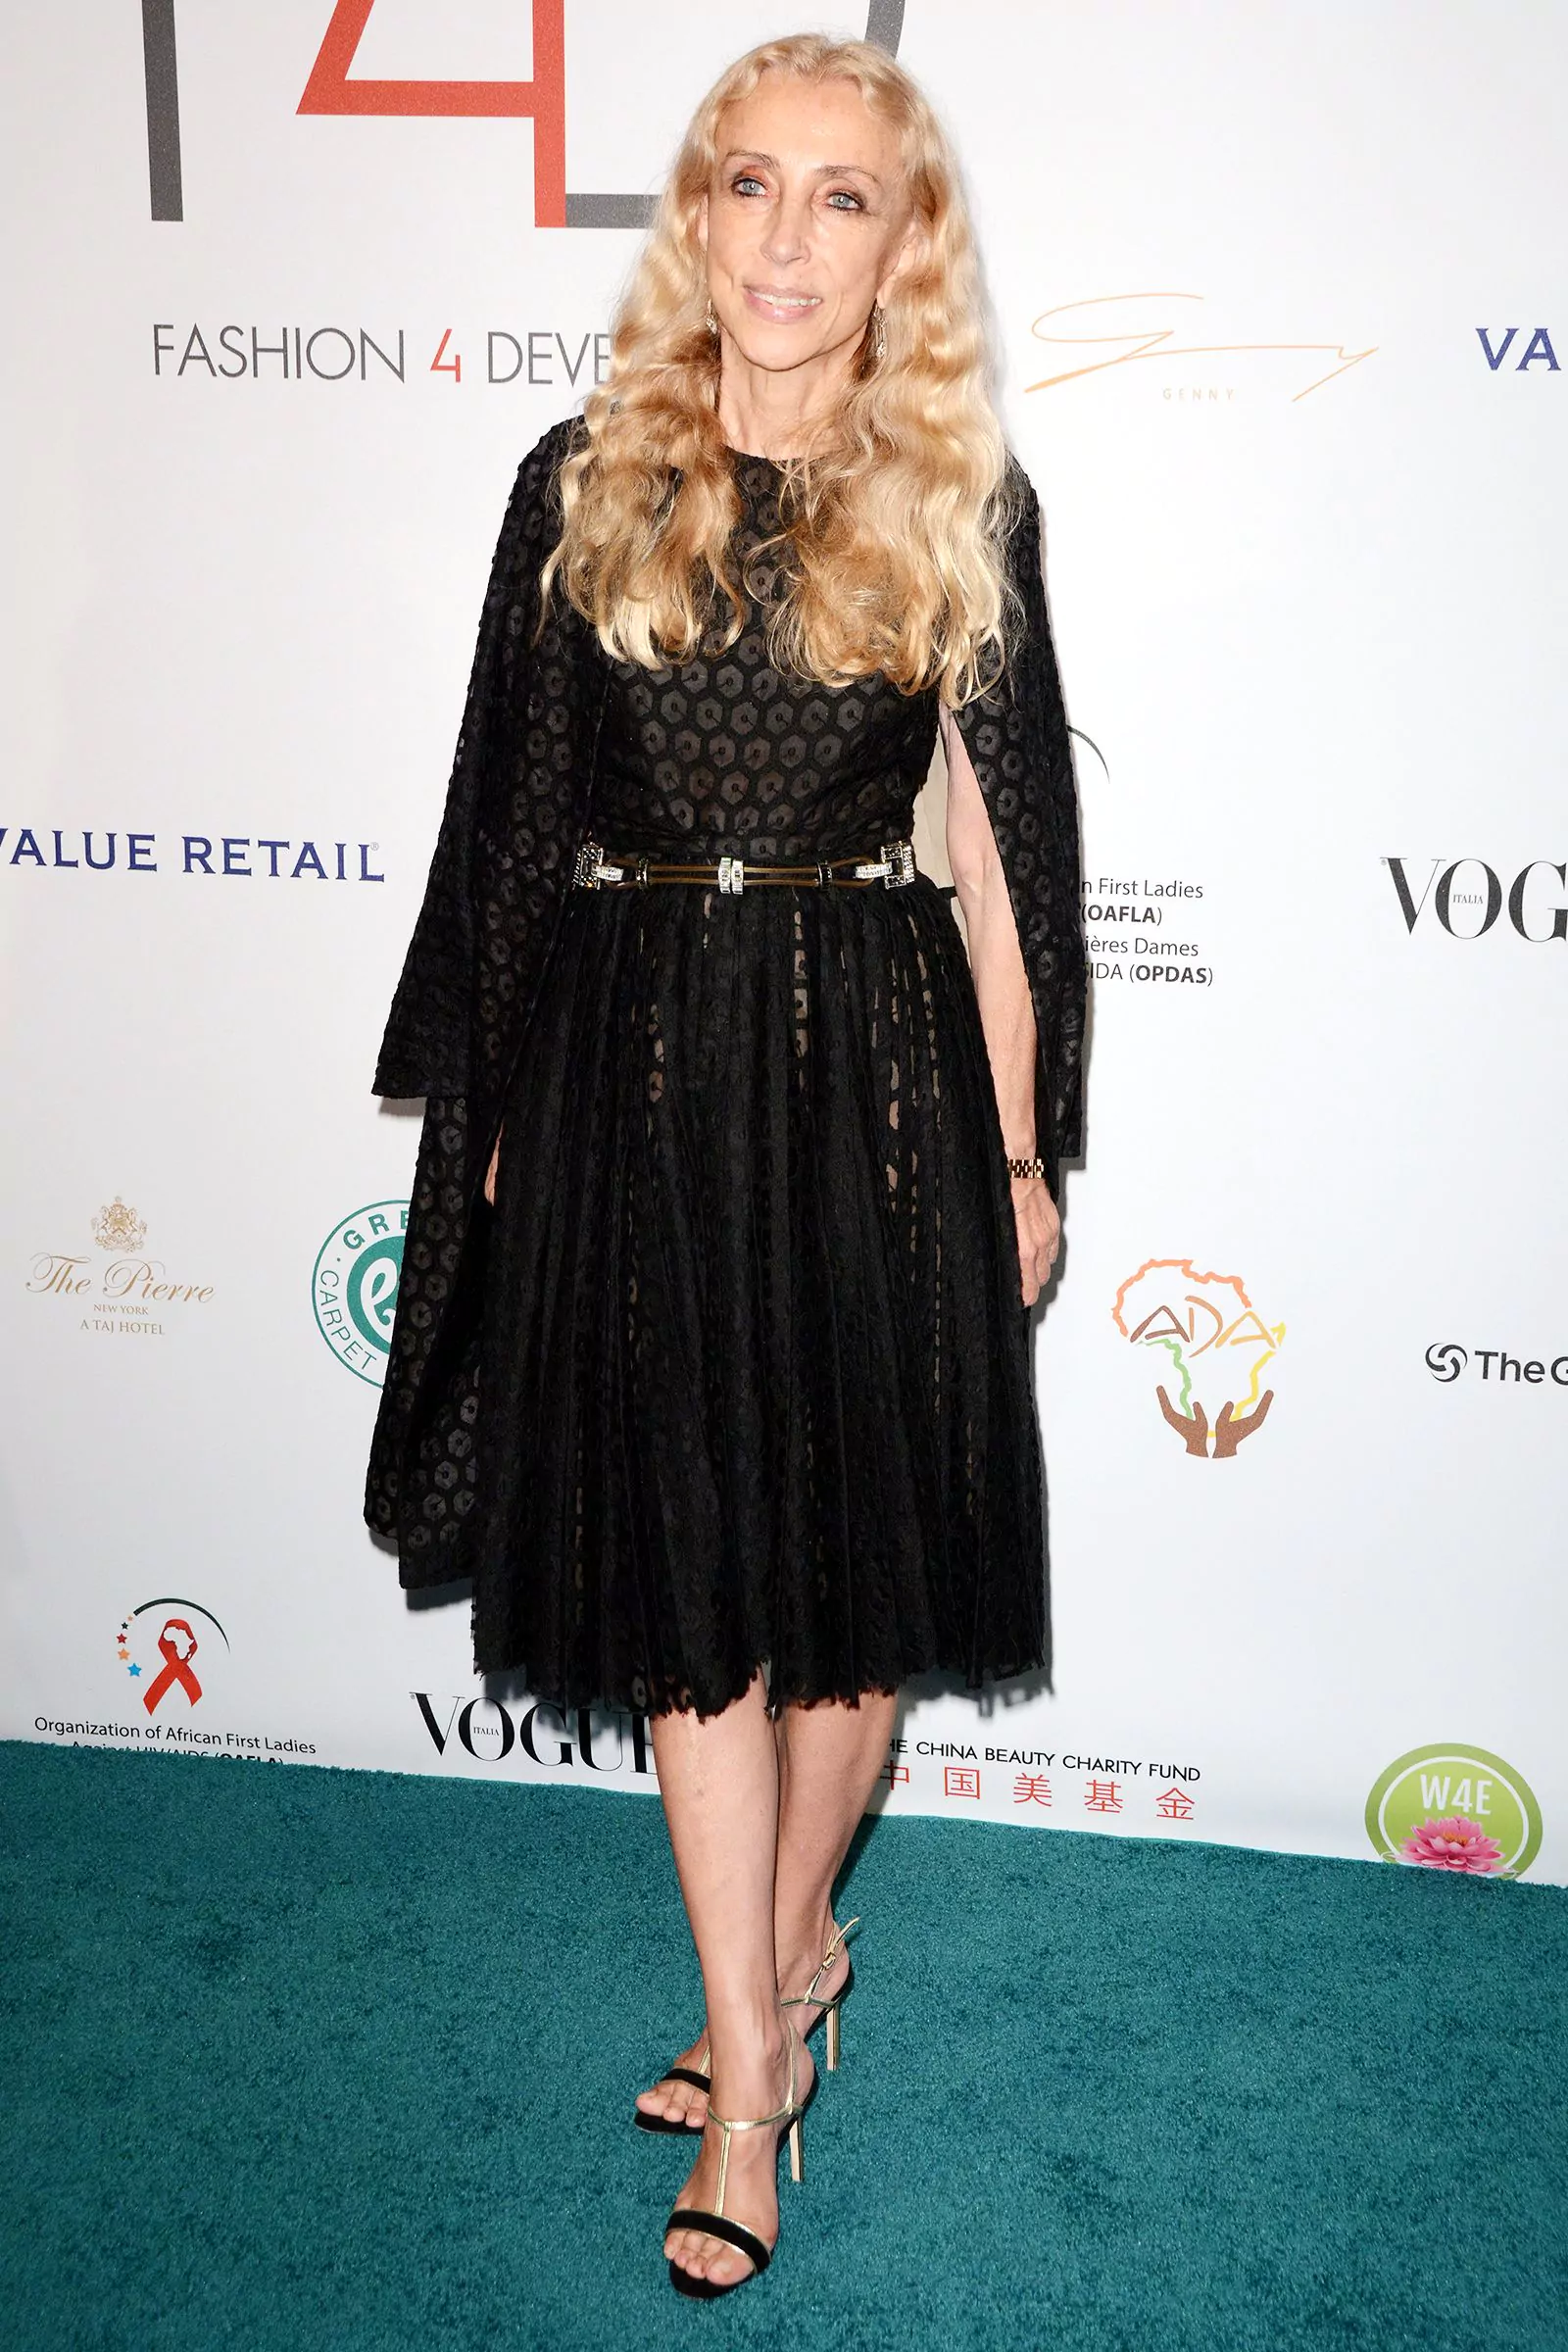 Franca Sozzani at the Fashion 4 Development (F4D) First Ladies Luncheon in New York City on September 28, 2015.